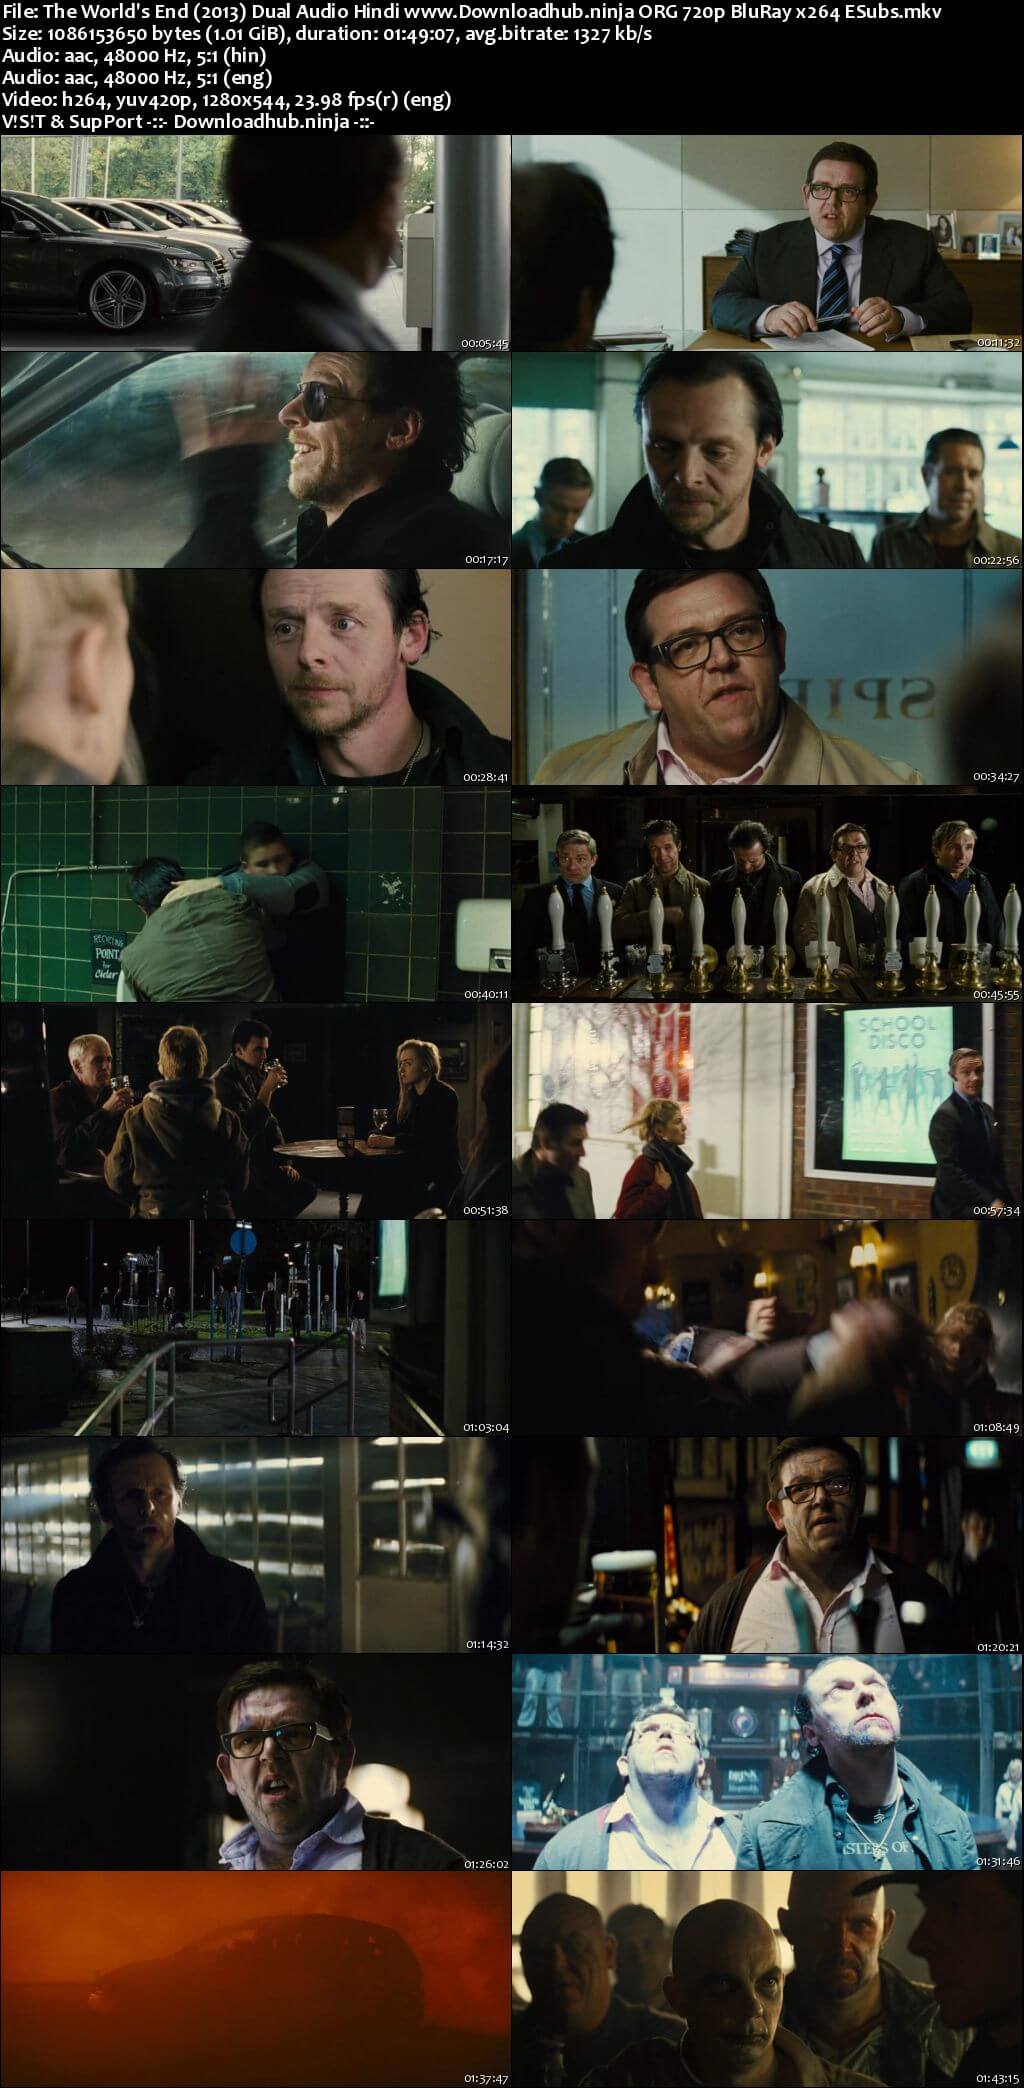 The Worlds End 2013 Hindi Dual Audio 720p BluRay ESubs